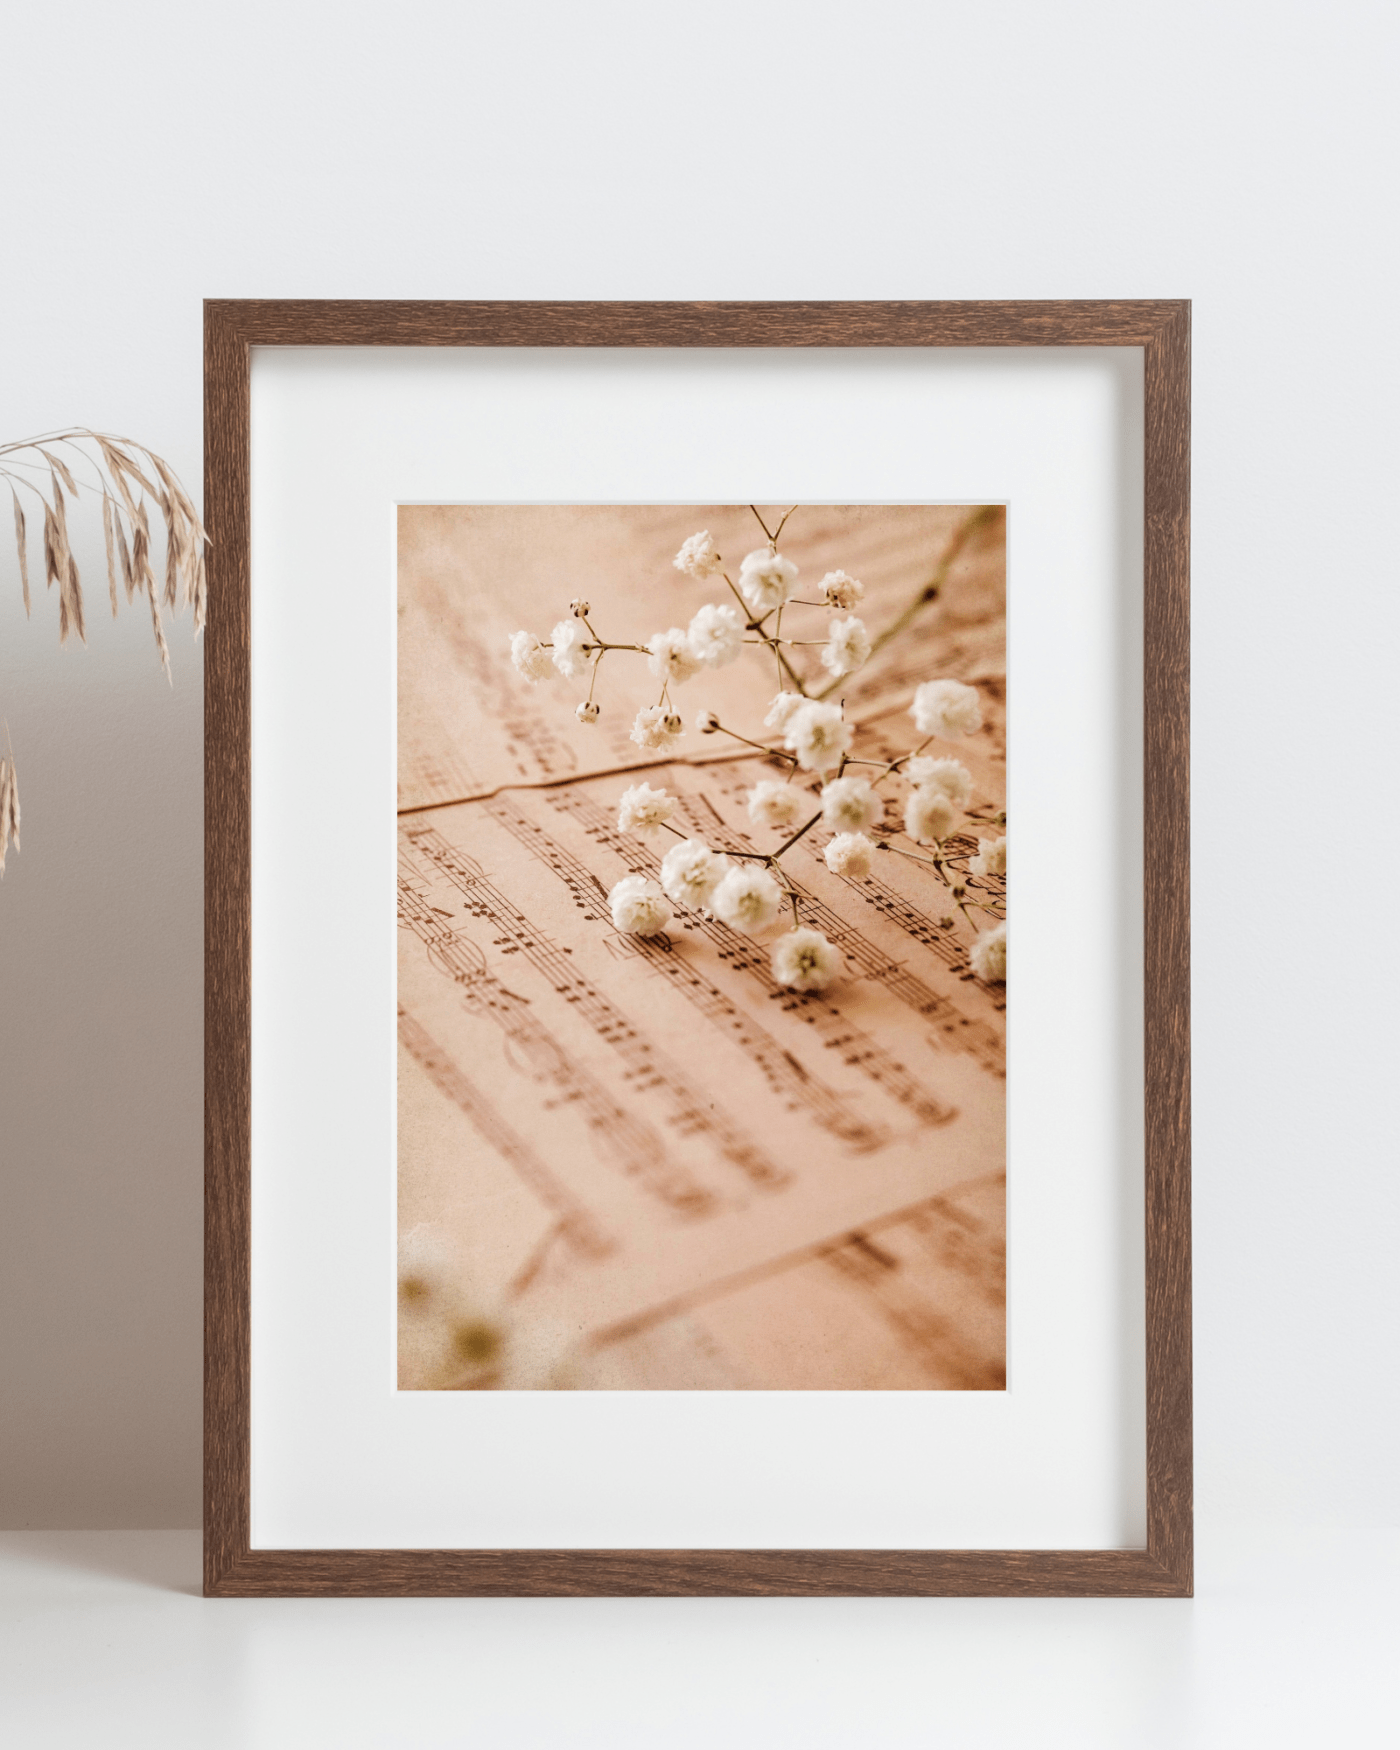 Small White Flowers and Music Sheets Mockup2